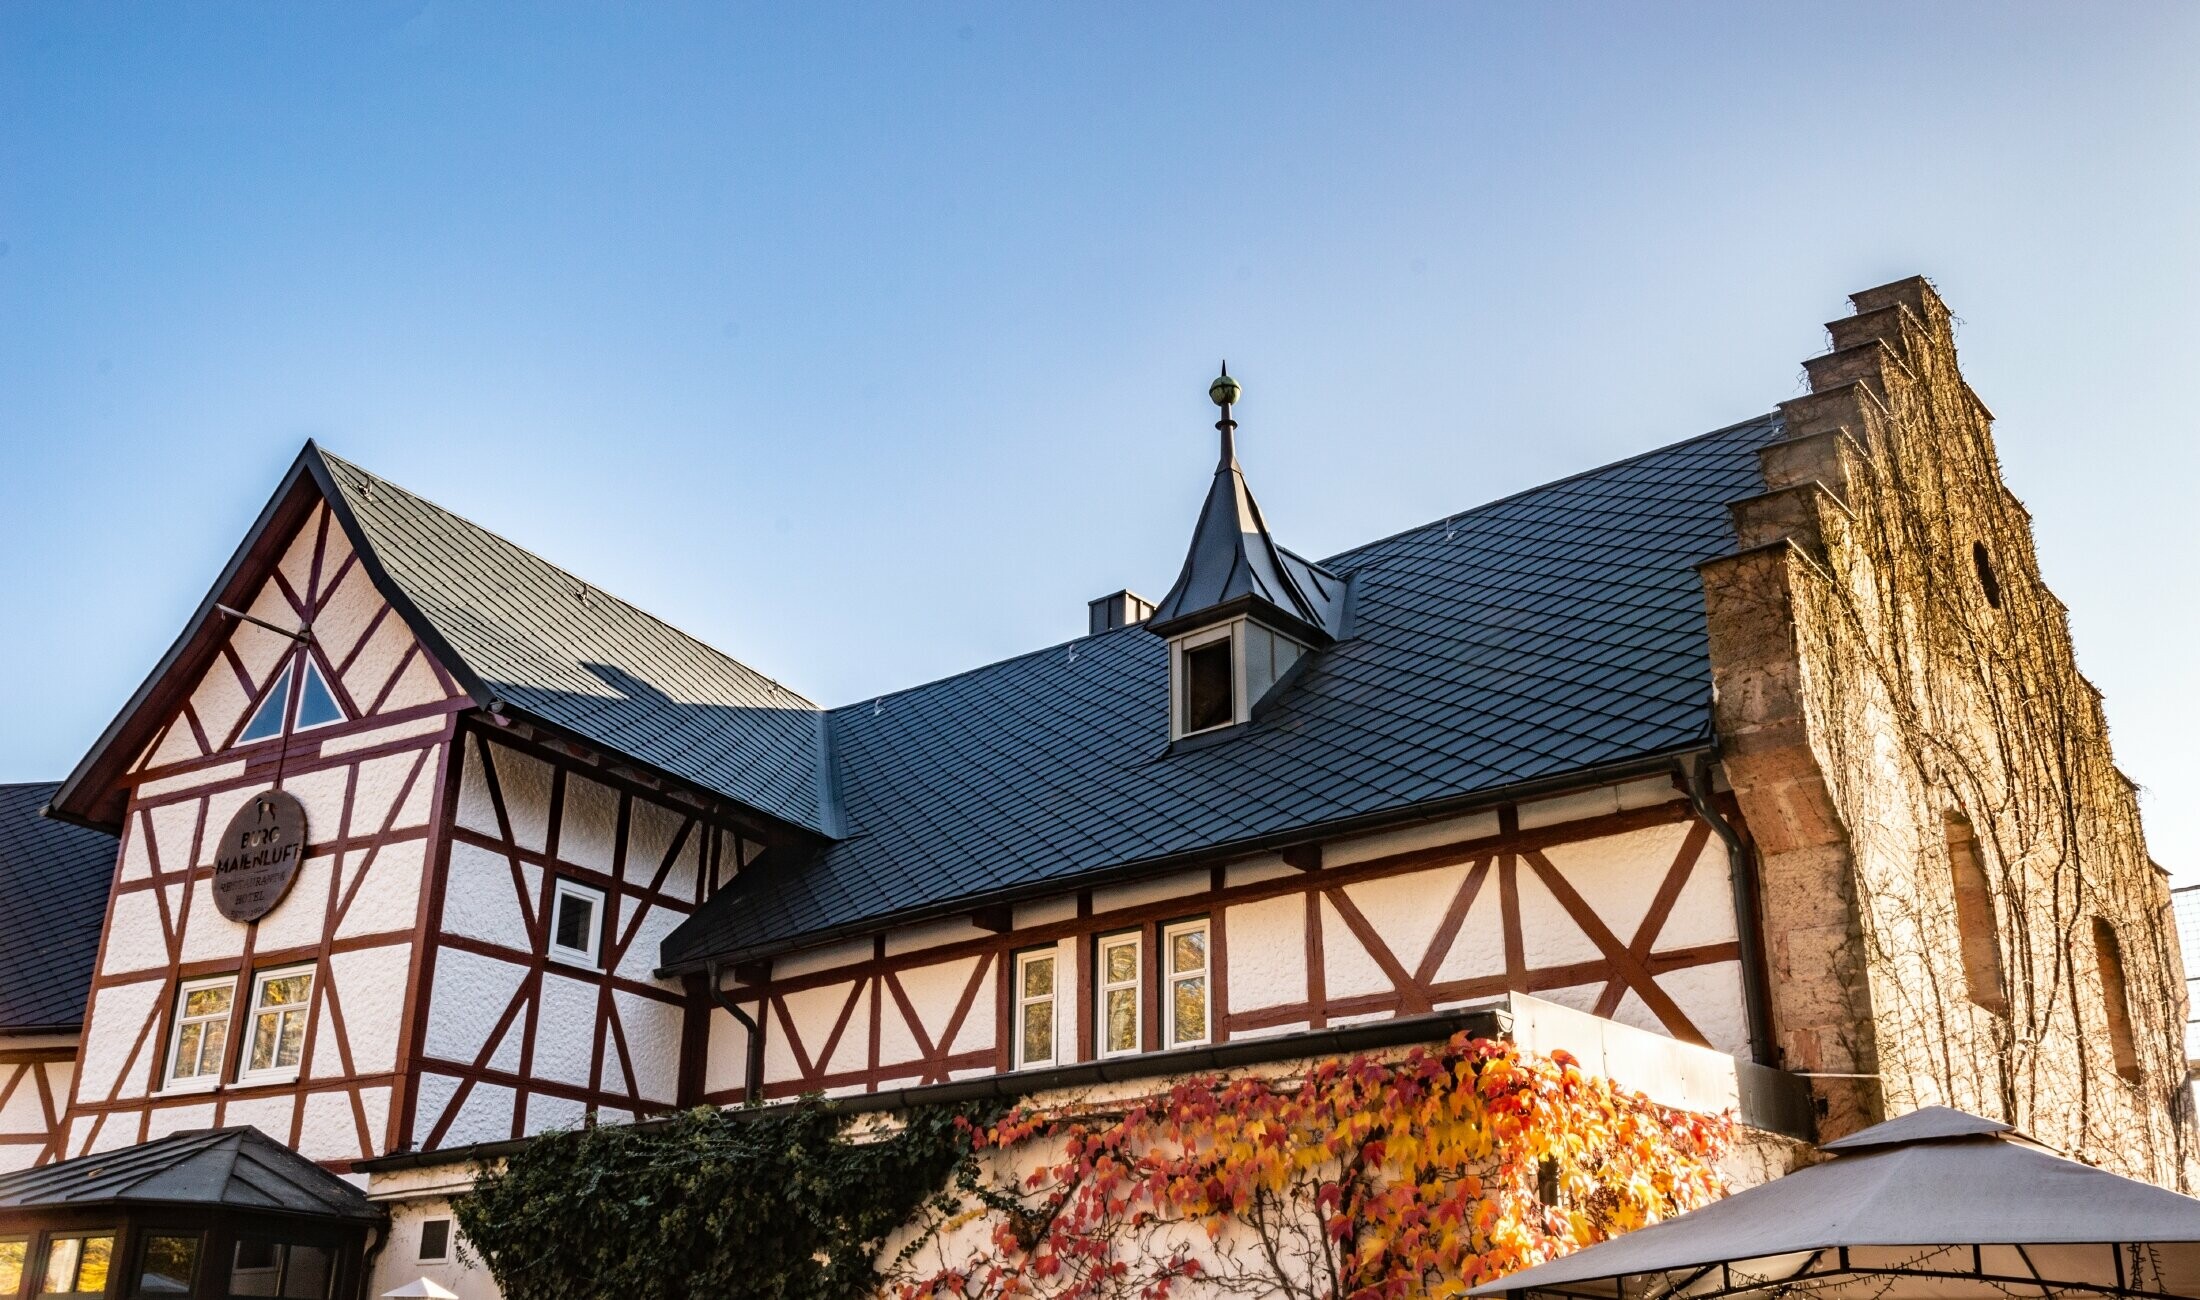 The Hotel Burg Maienluft was newly clad in the PREFA 29 x 29 rhomboid roof tile in anthracite with a half-timbered façade.